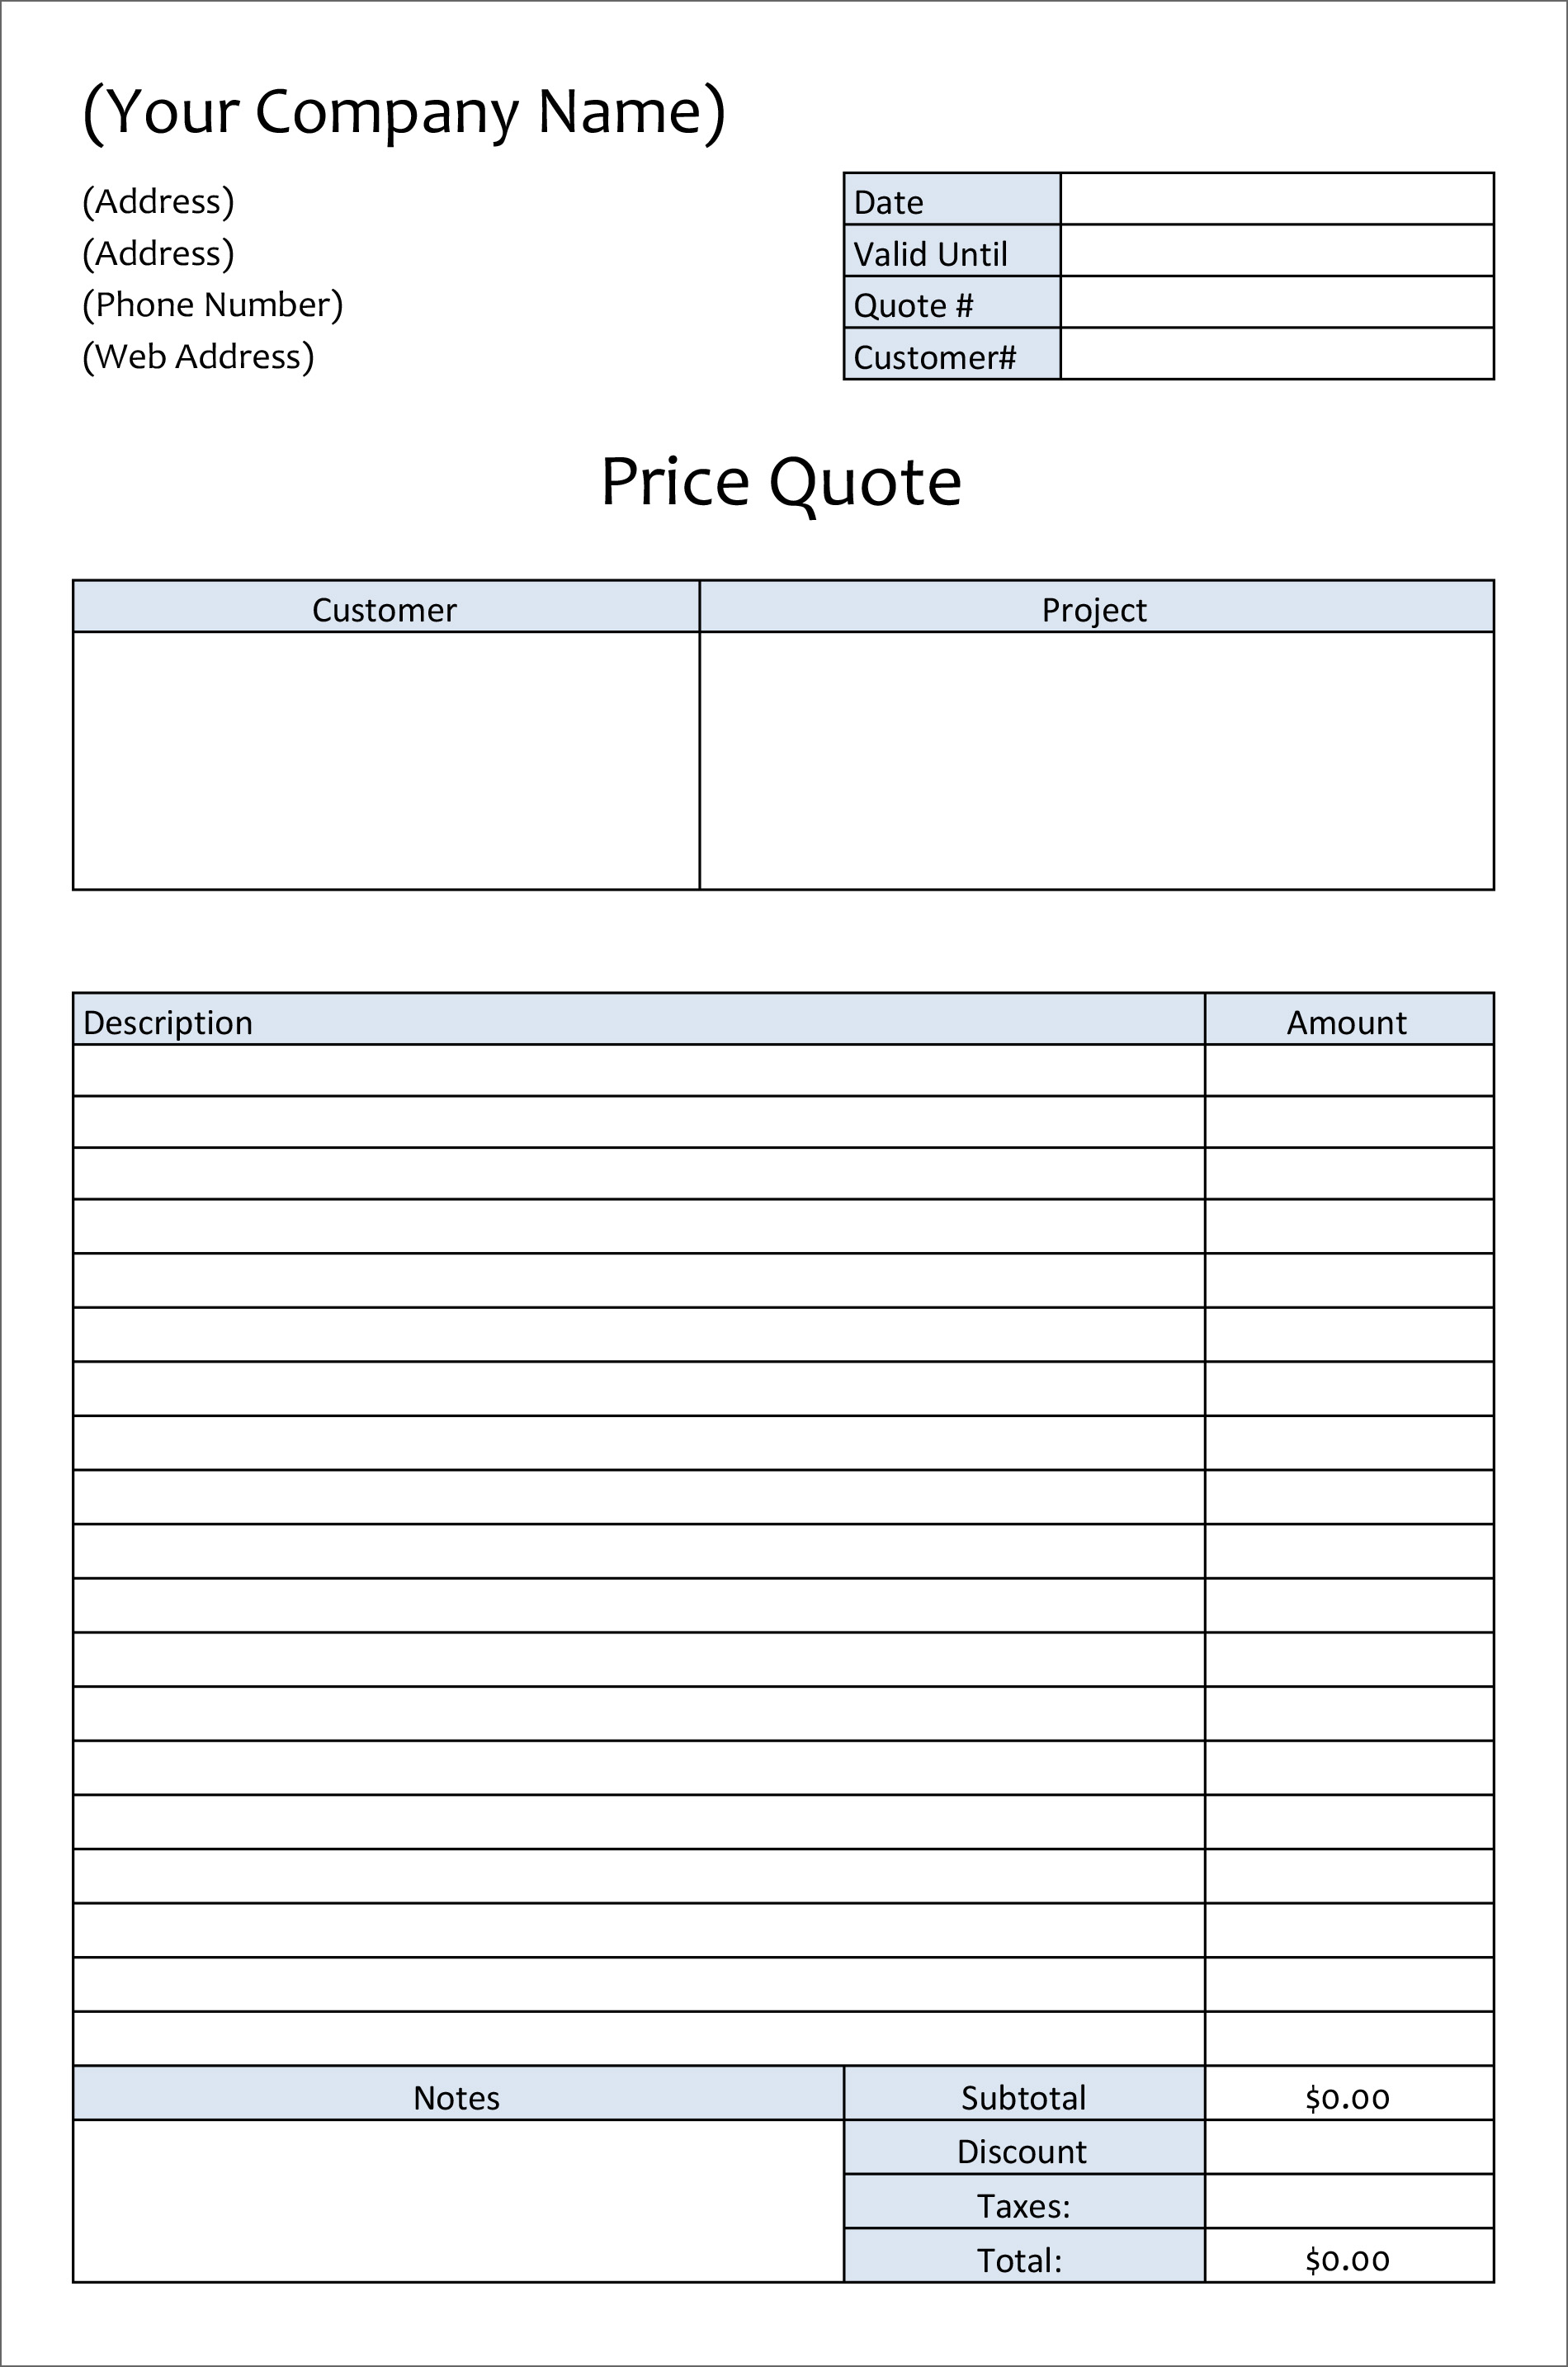 printable-quote-form-printable-forms-free-online